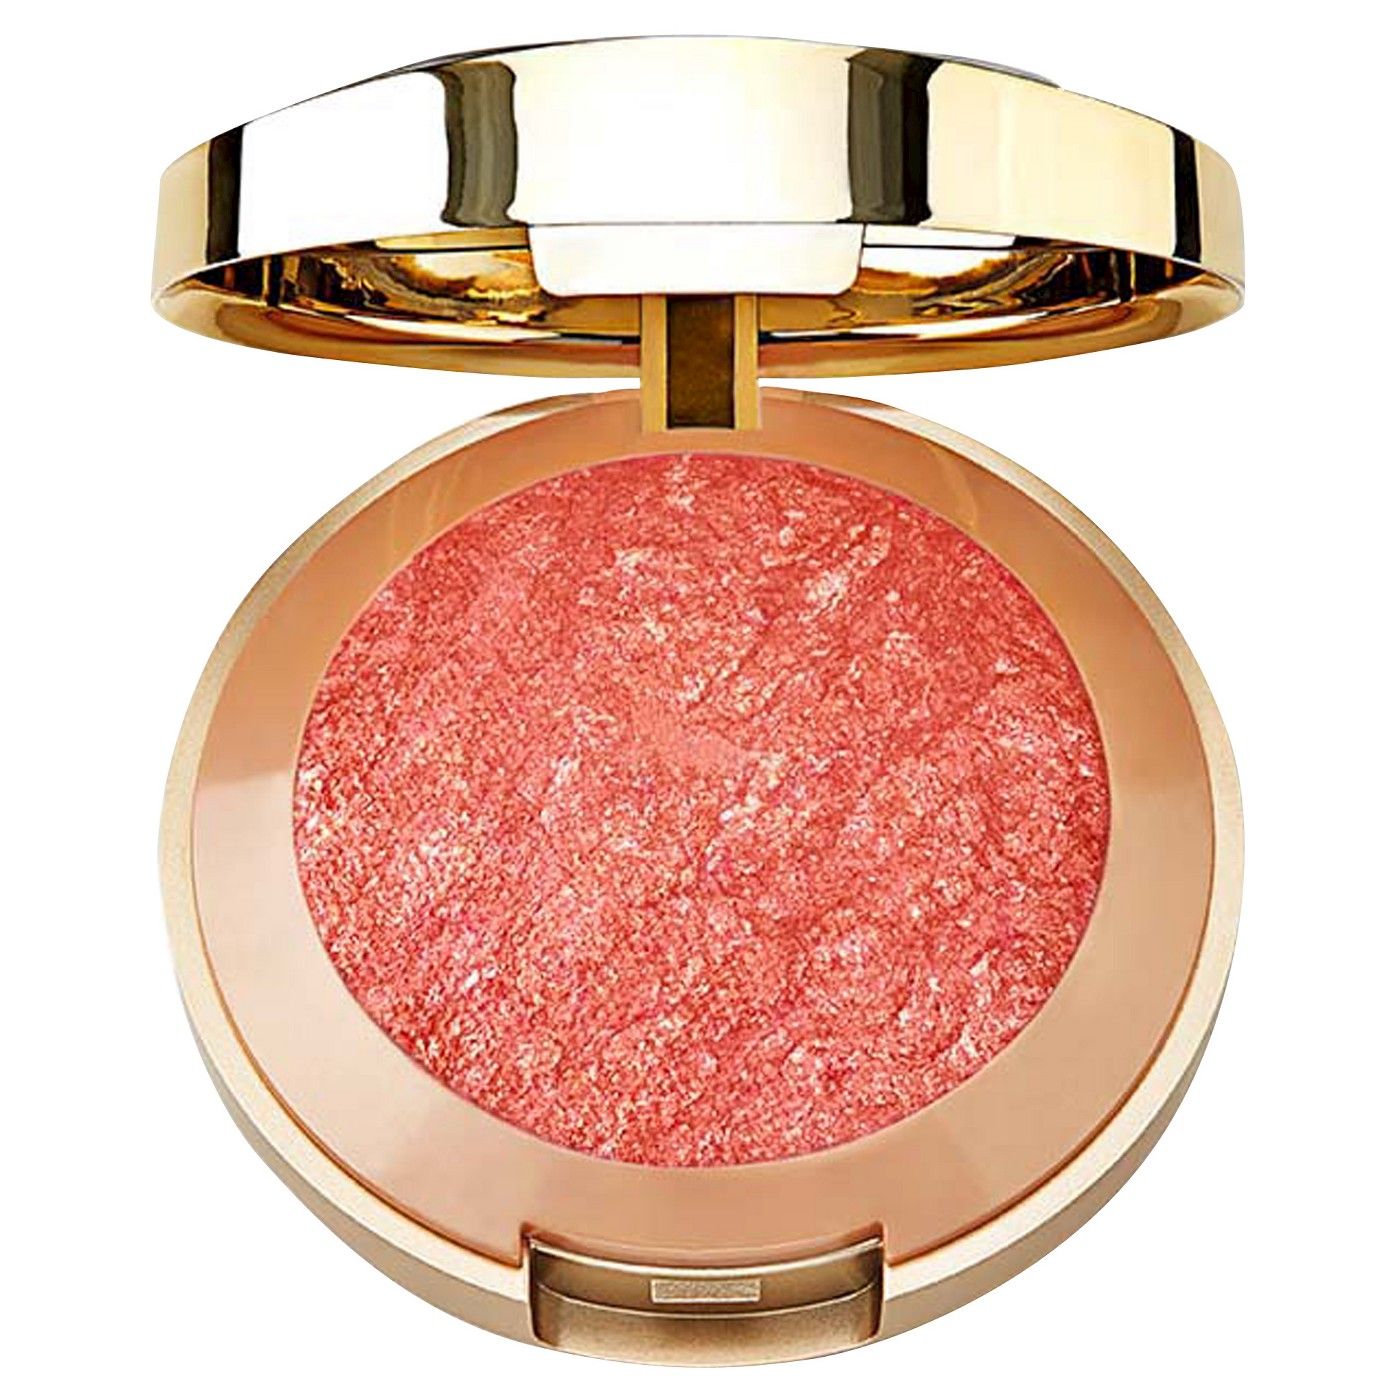 orange blush is trending for fall & it’s surprisingly wearable